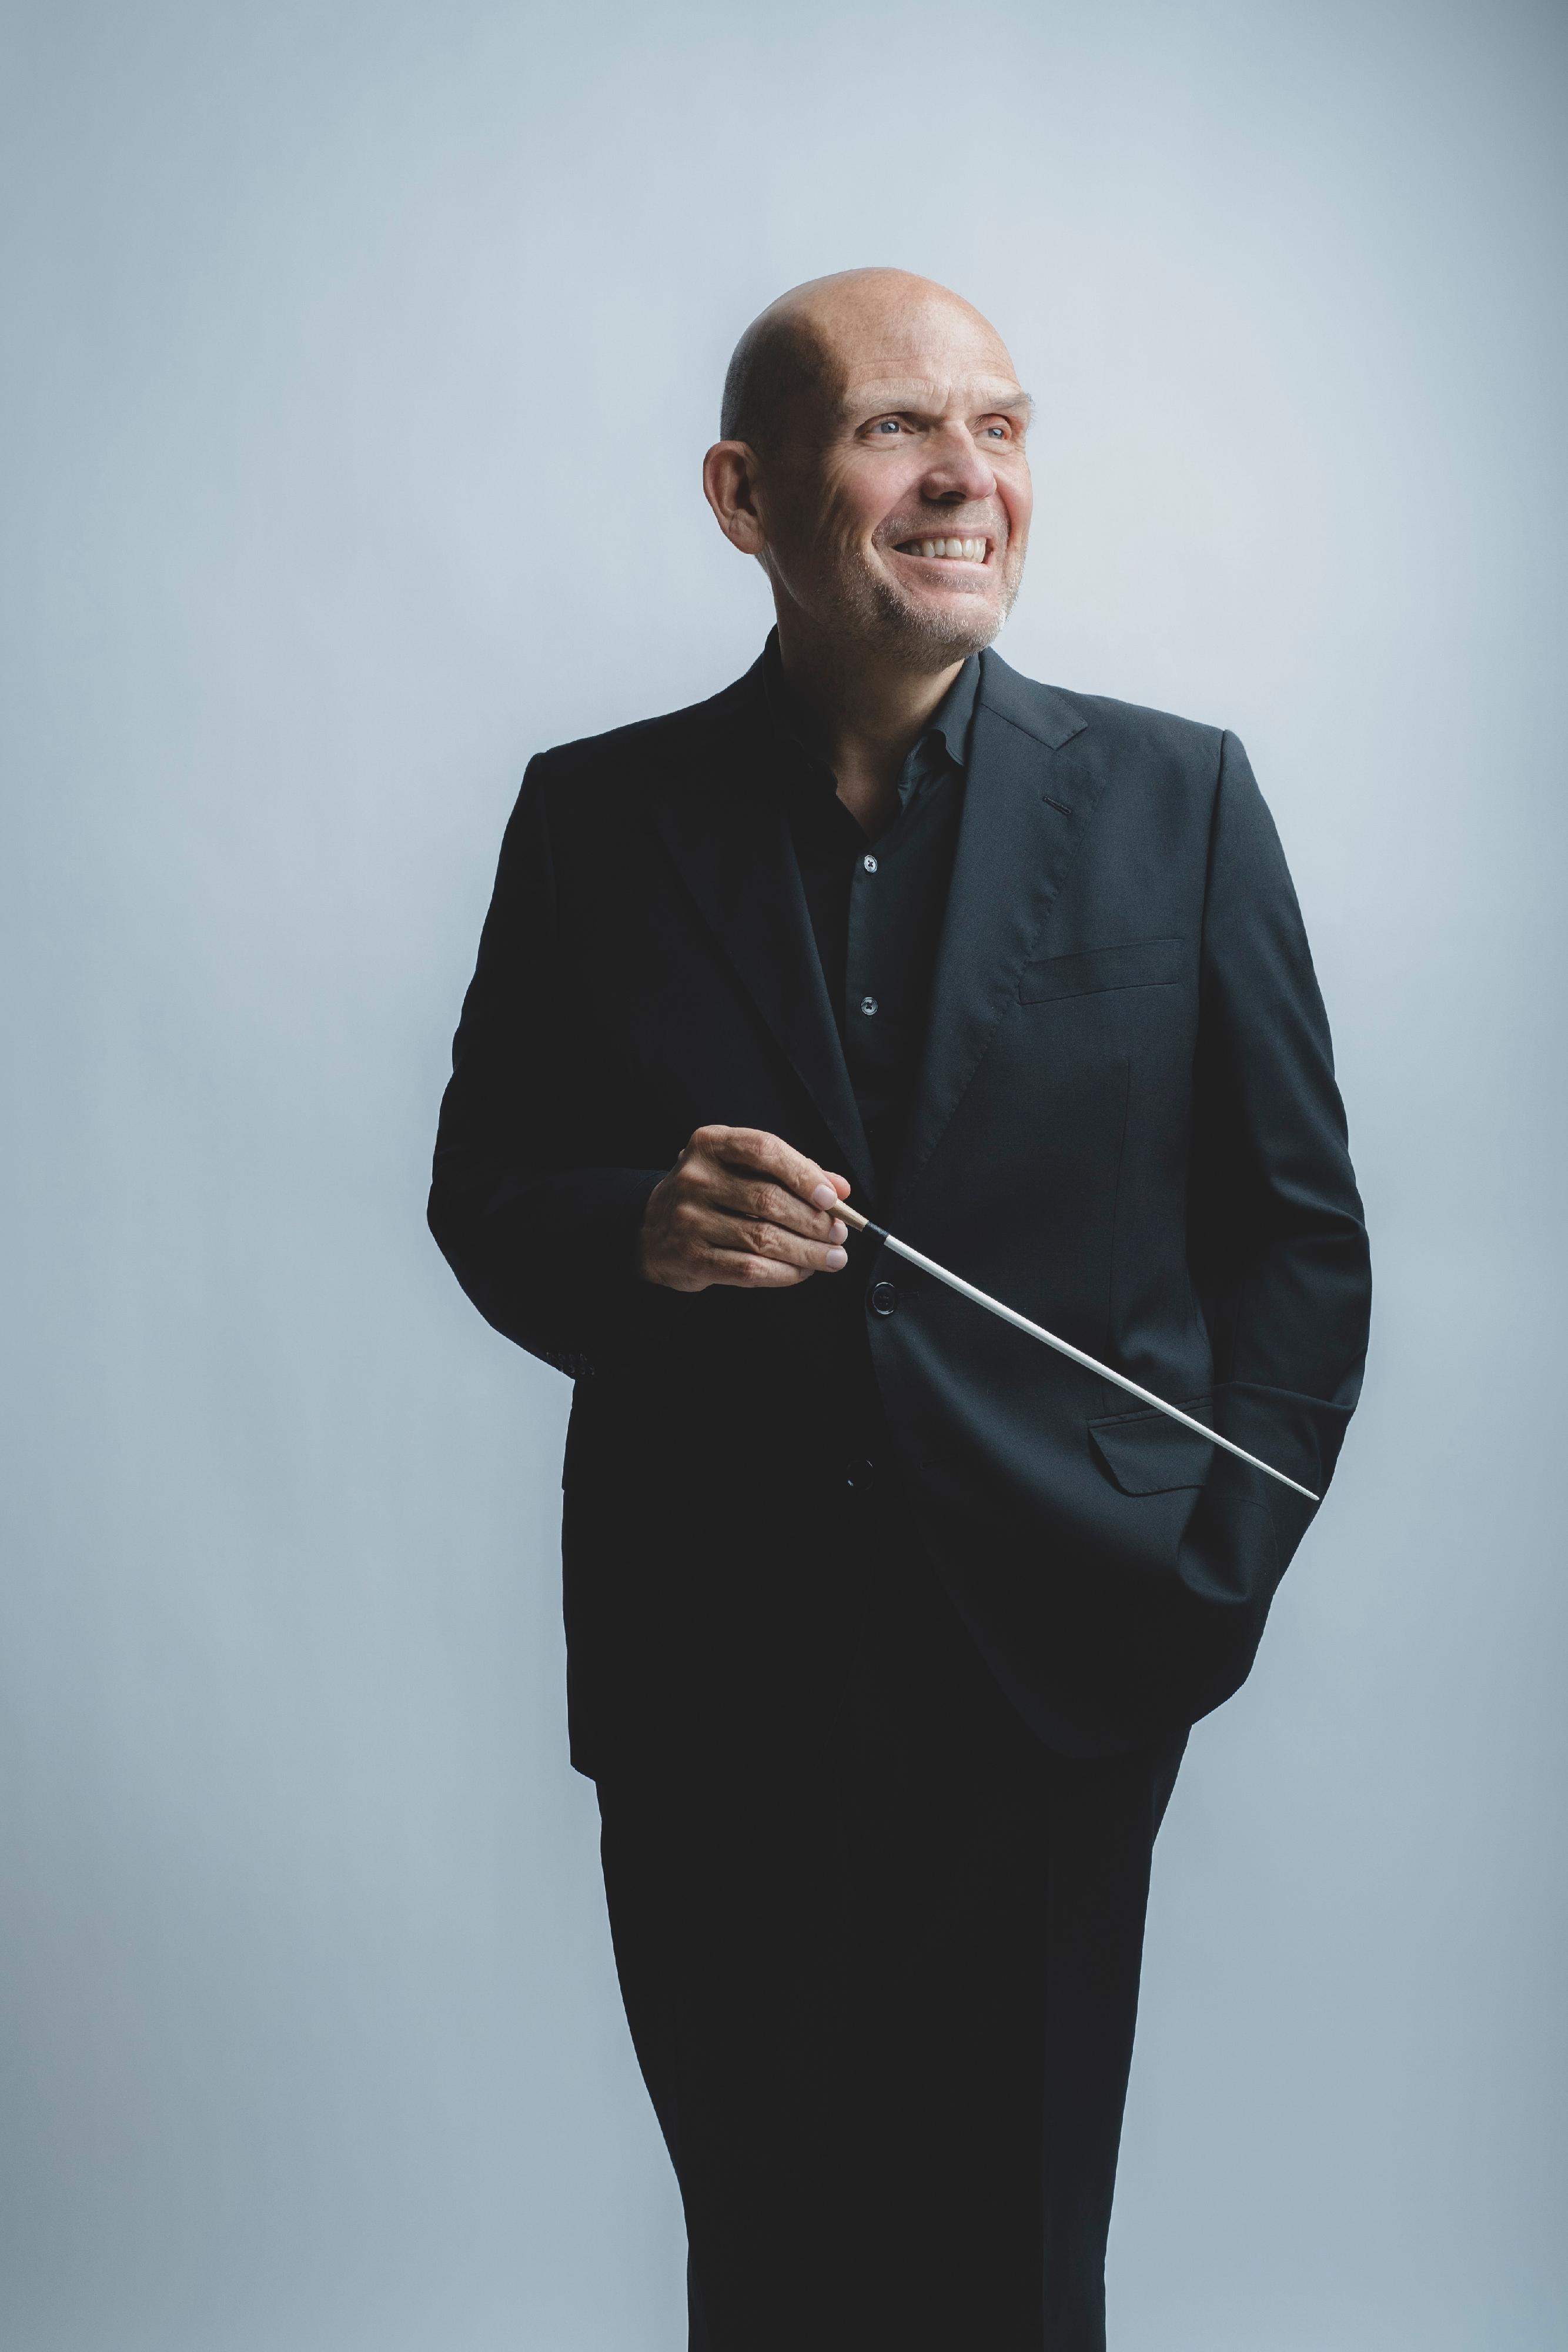 The New York Philharmonic has been invited by the Leisure and Cultural Services Department to stage two concerts on July 4 and 5 (Tuesday and Wednesday). Photo shows the Music Director of the New York Philharmonic, Jaap van Zweden. (Source of photo: Dario Acosta)